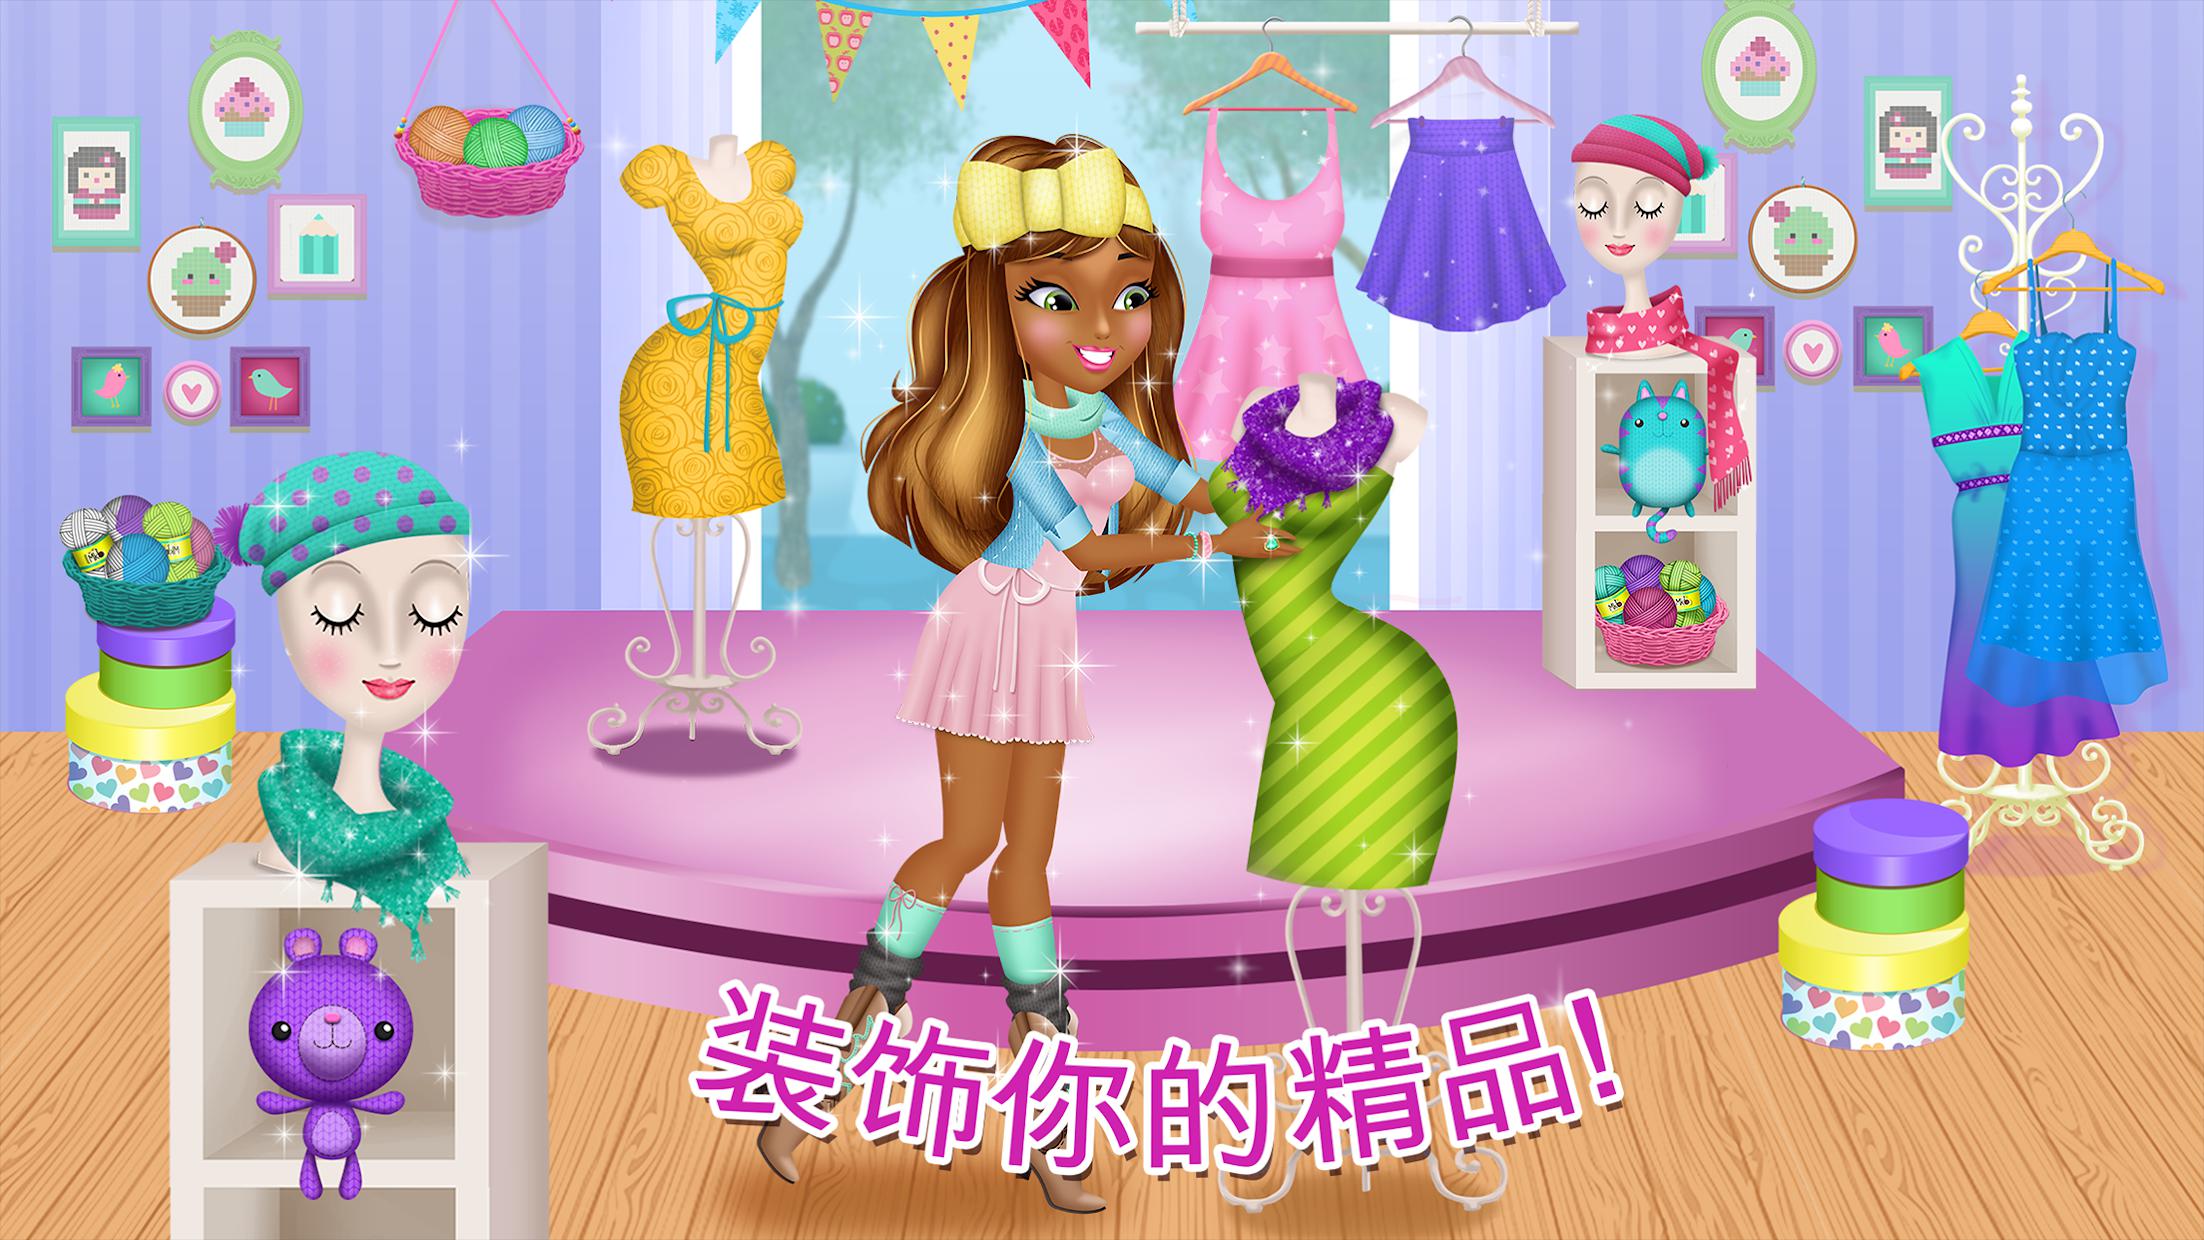 My Knit Boutique - Store Girls_截图_2